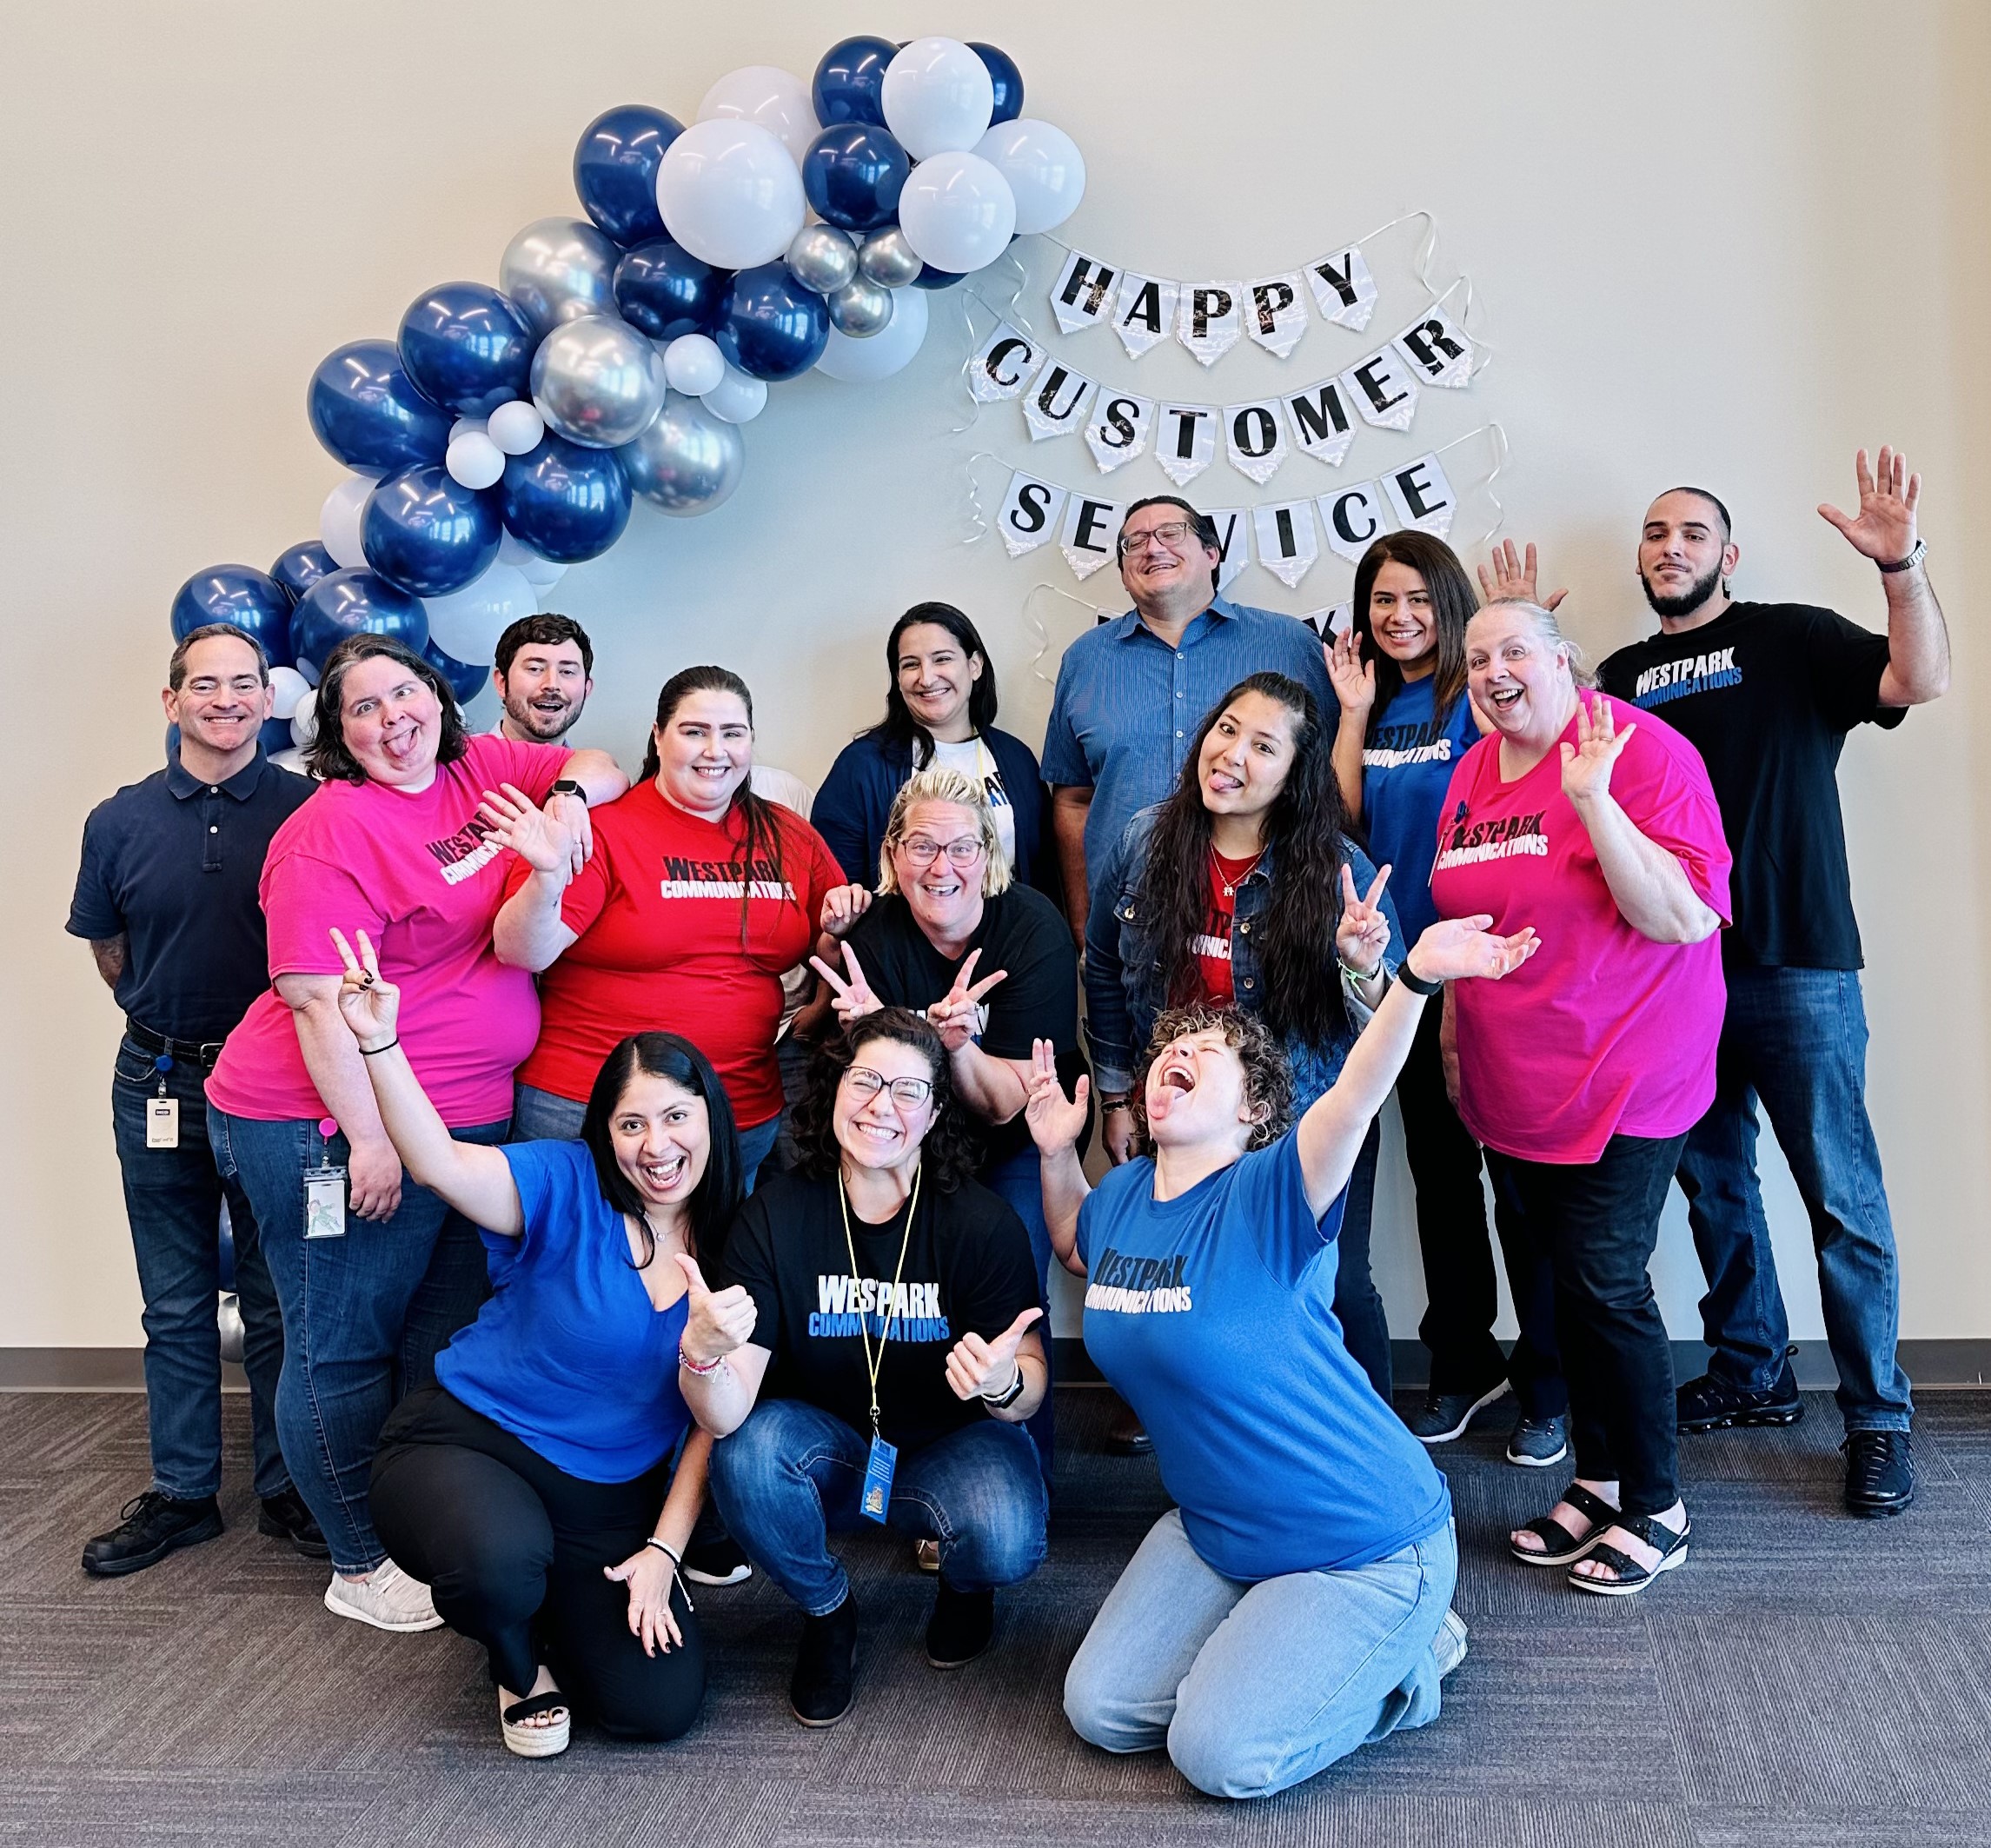 group of employees dressed in blue, pink, and red shirts with balloons in front of a sign that says "Happy Customer Service Week"